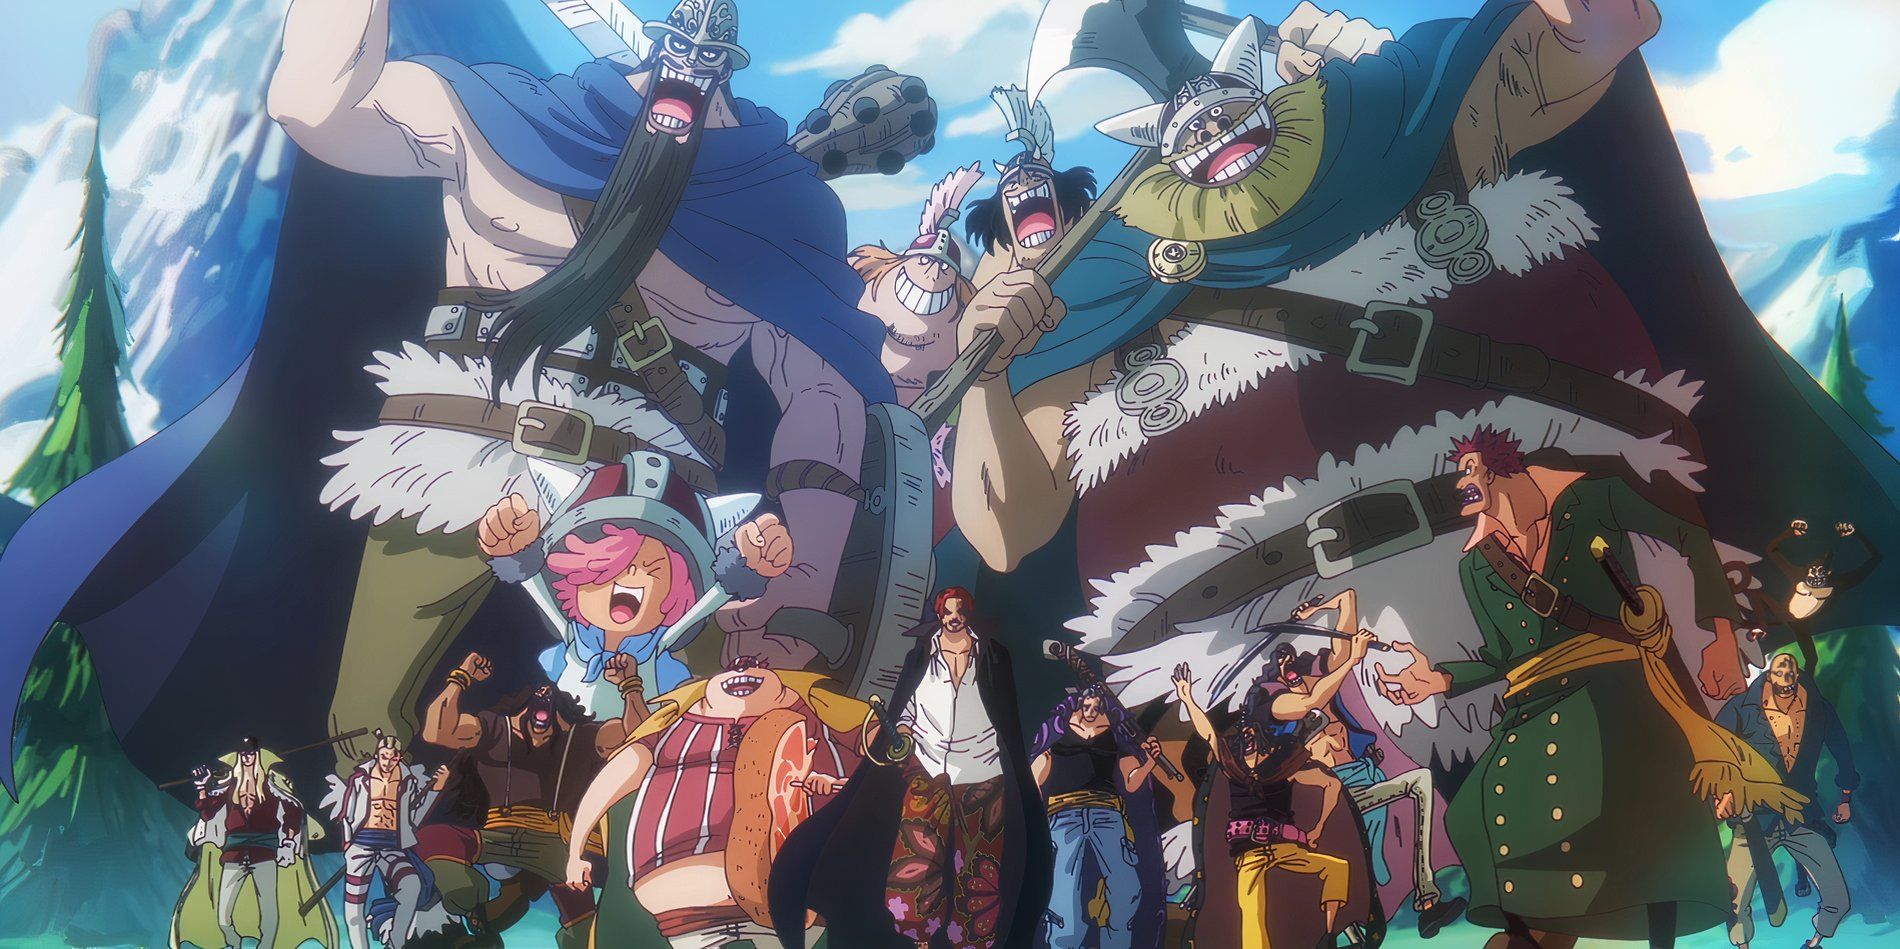 One Piece Anime Episode 1109 shows Elbaf along with the Giants Brogy and Dorry as they follow Shanks and his crew into battle.